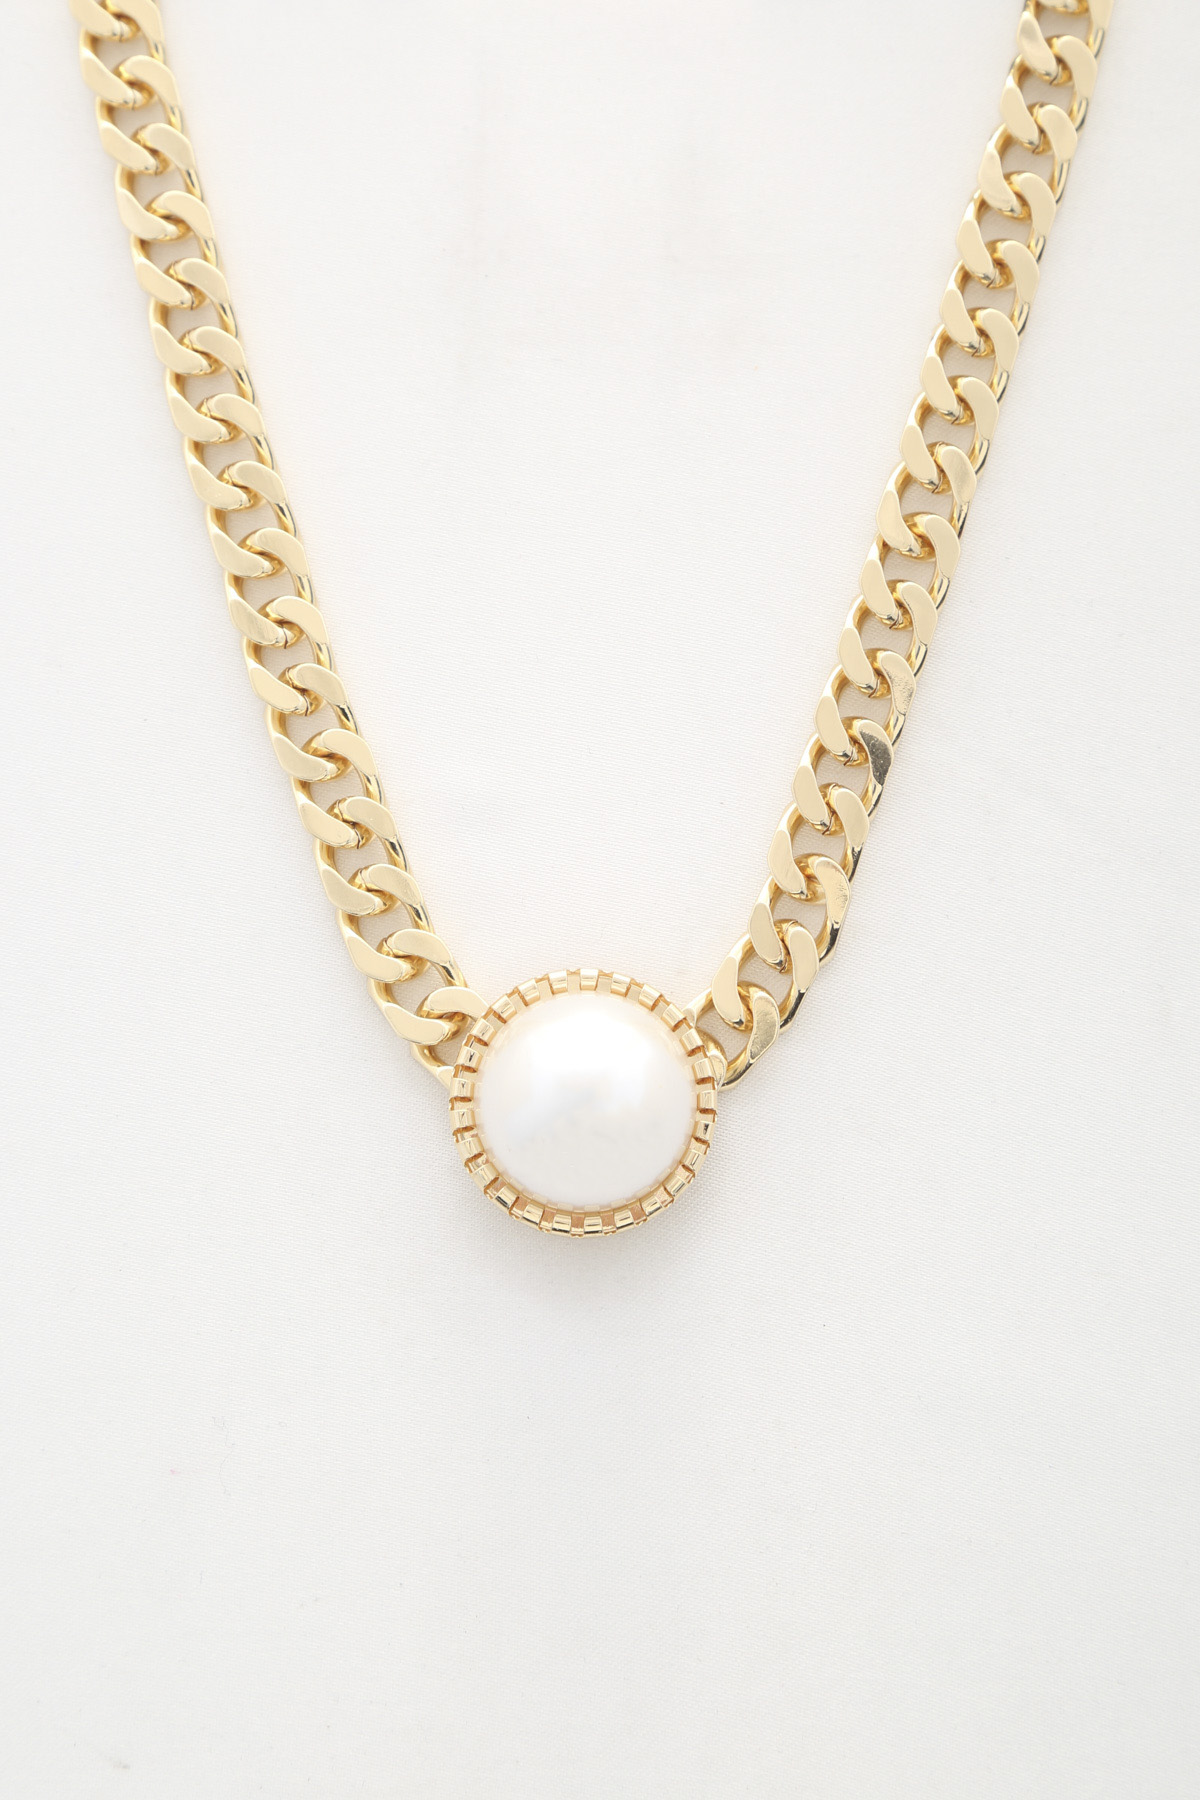 ROUND PEARL CURB LINK NECKLACE